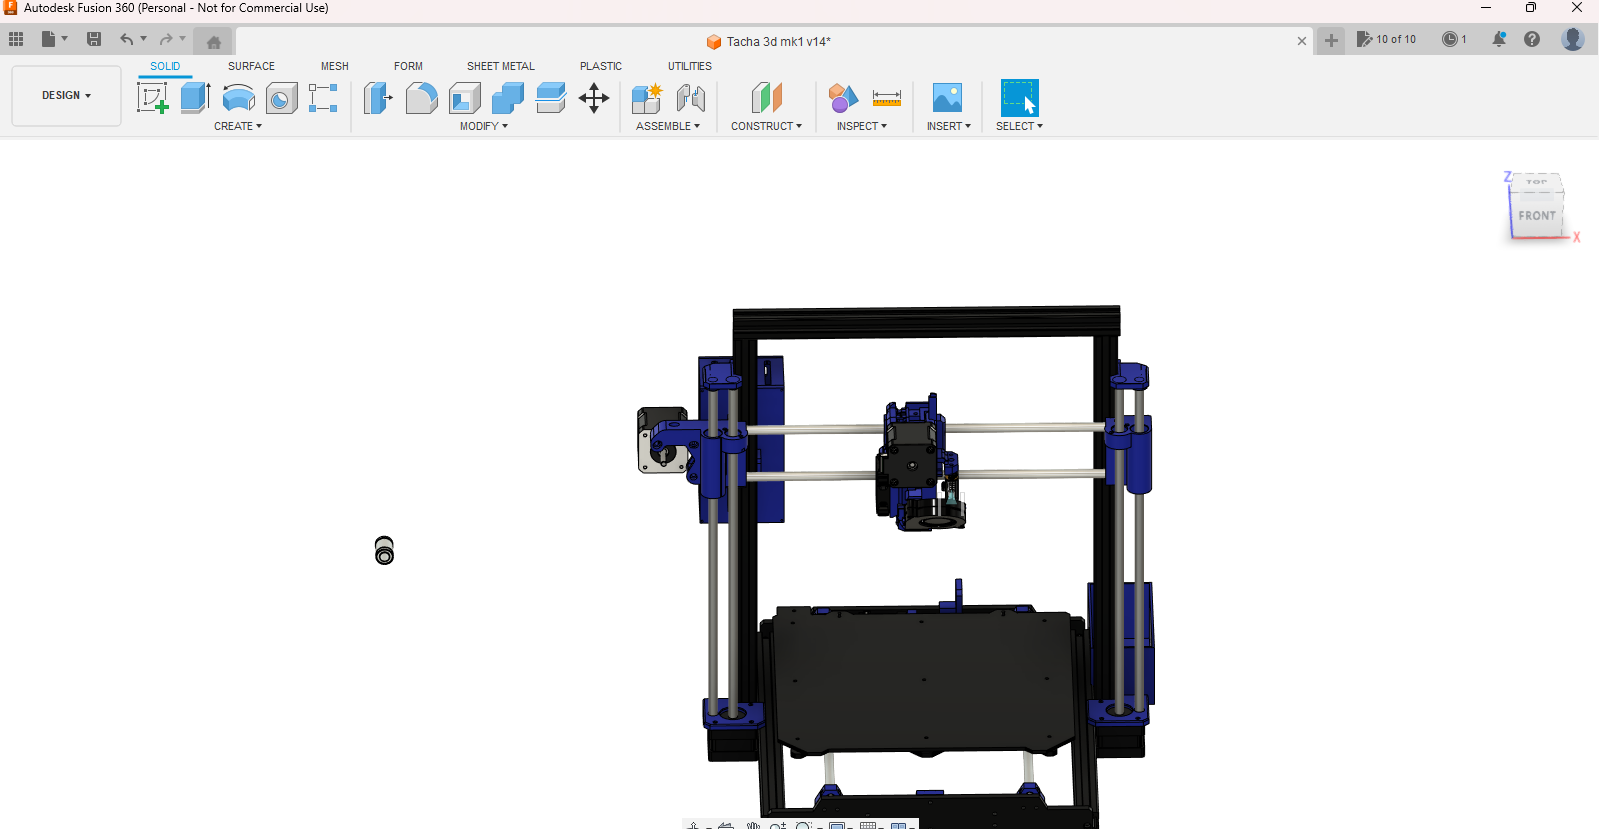 Autodesk Fusion 360 (Personal - Not for Commercial Use) 6_30_2023 9_40_33 PM.png